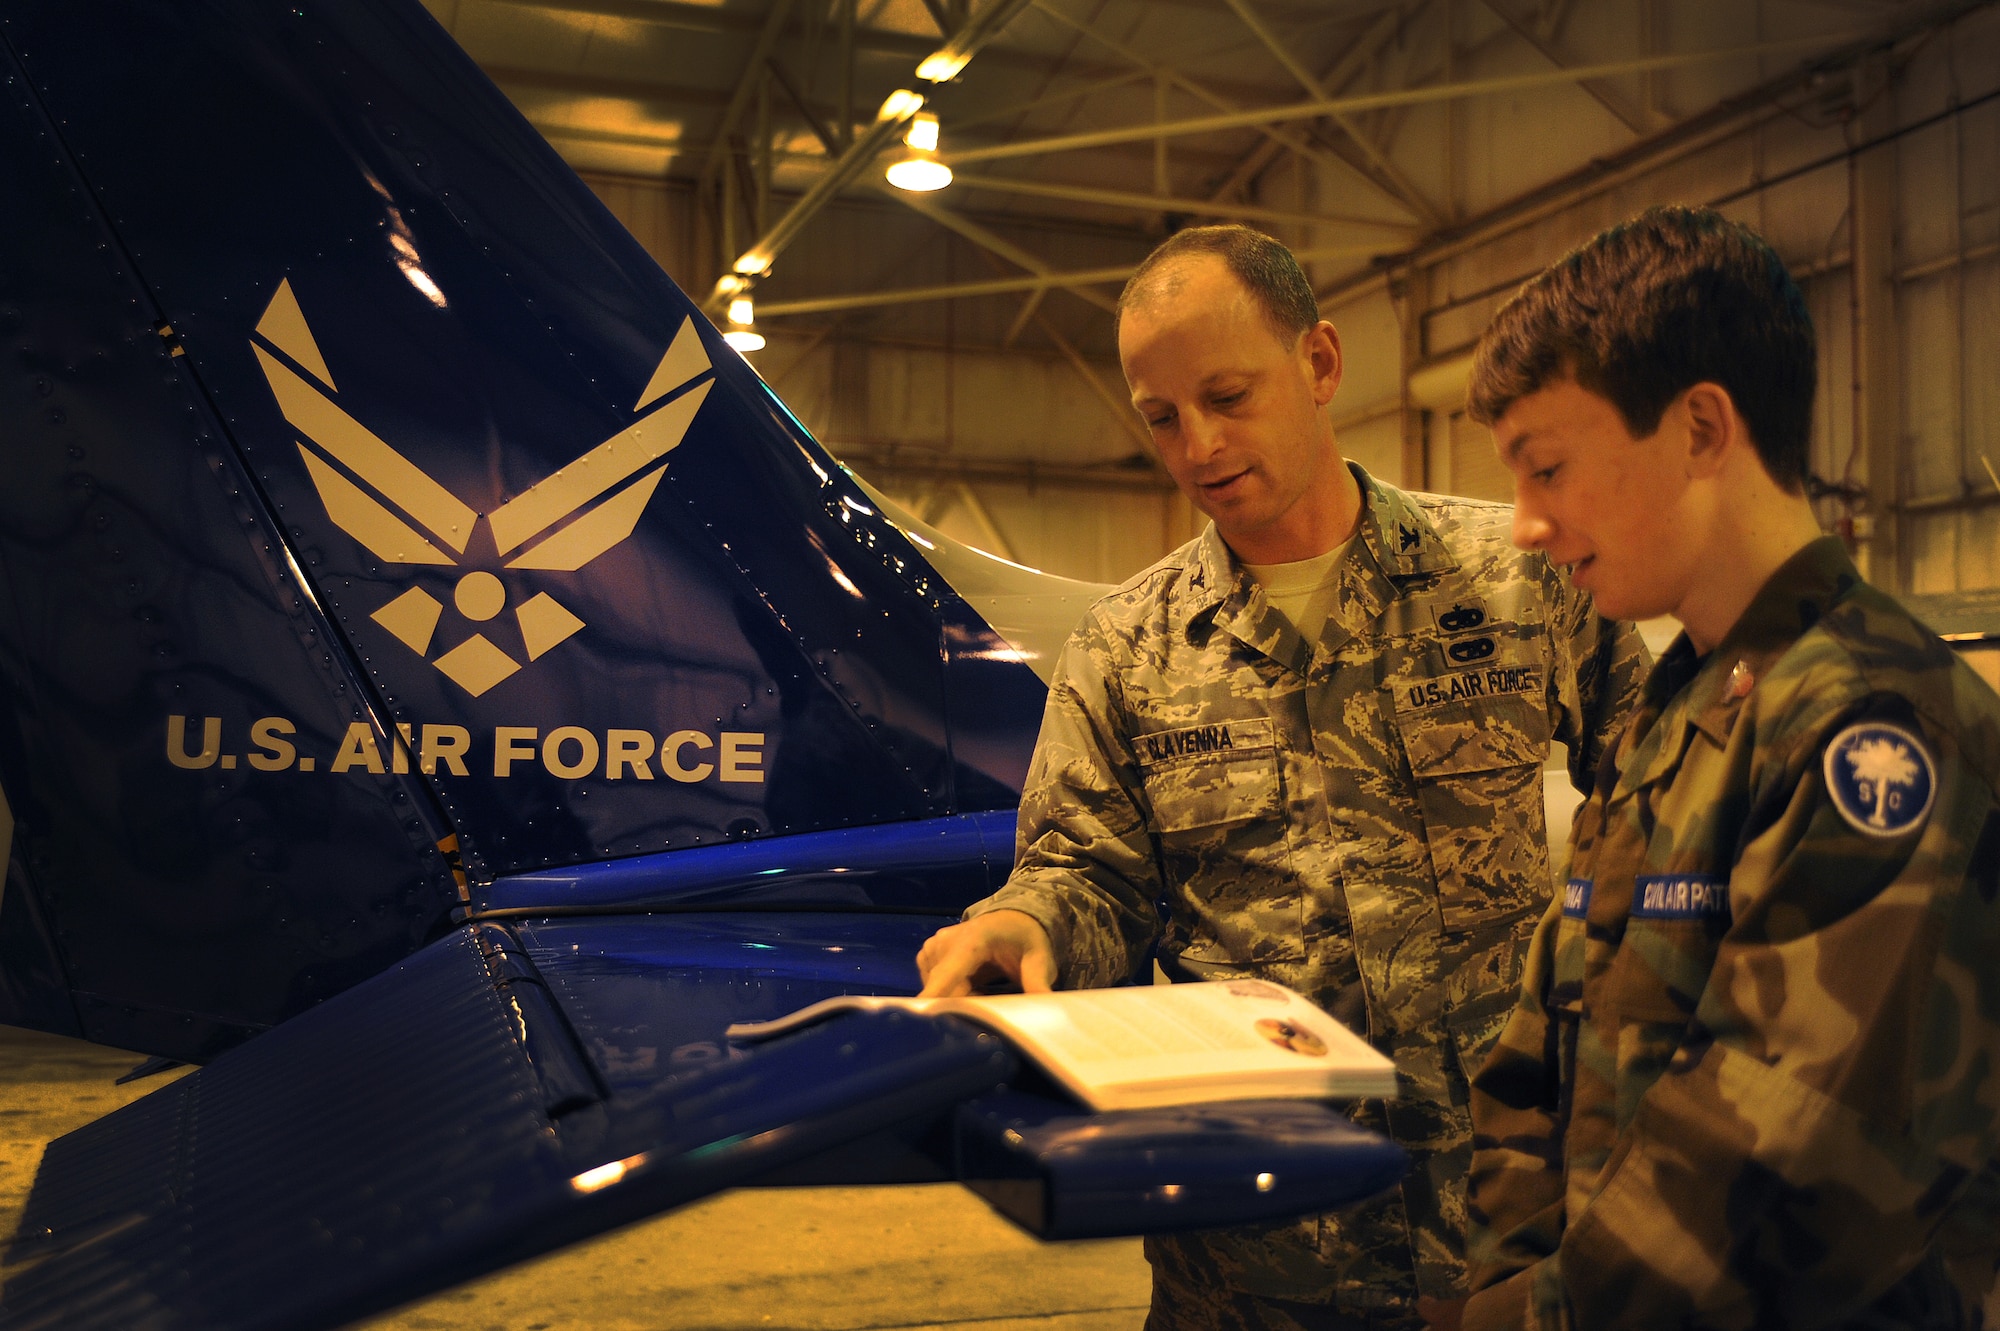 Cadet Airmen Jack Clavenna and father Col. James Clavenna read the Civil Air Patrol Leadership Manual to  at the Coastal Charleston Composite Squadron, Joint Base Charleston - Air Base Feb. 13. Clavenna takes his son to weekly CAP meetings. The Civil Air Patrol has one of the largest fleets of single-engine aircraft in the world, with more than 550 aircraft nationwide. Clavenna is the commander of the 437th Maintenance Group, 437th Airlift Wing. Jack has been in CAP for nearly a year. (U.S. Air Force photo/Airman 1st Class Ashlee Galloway)